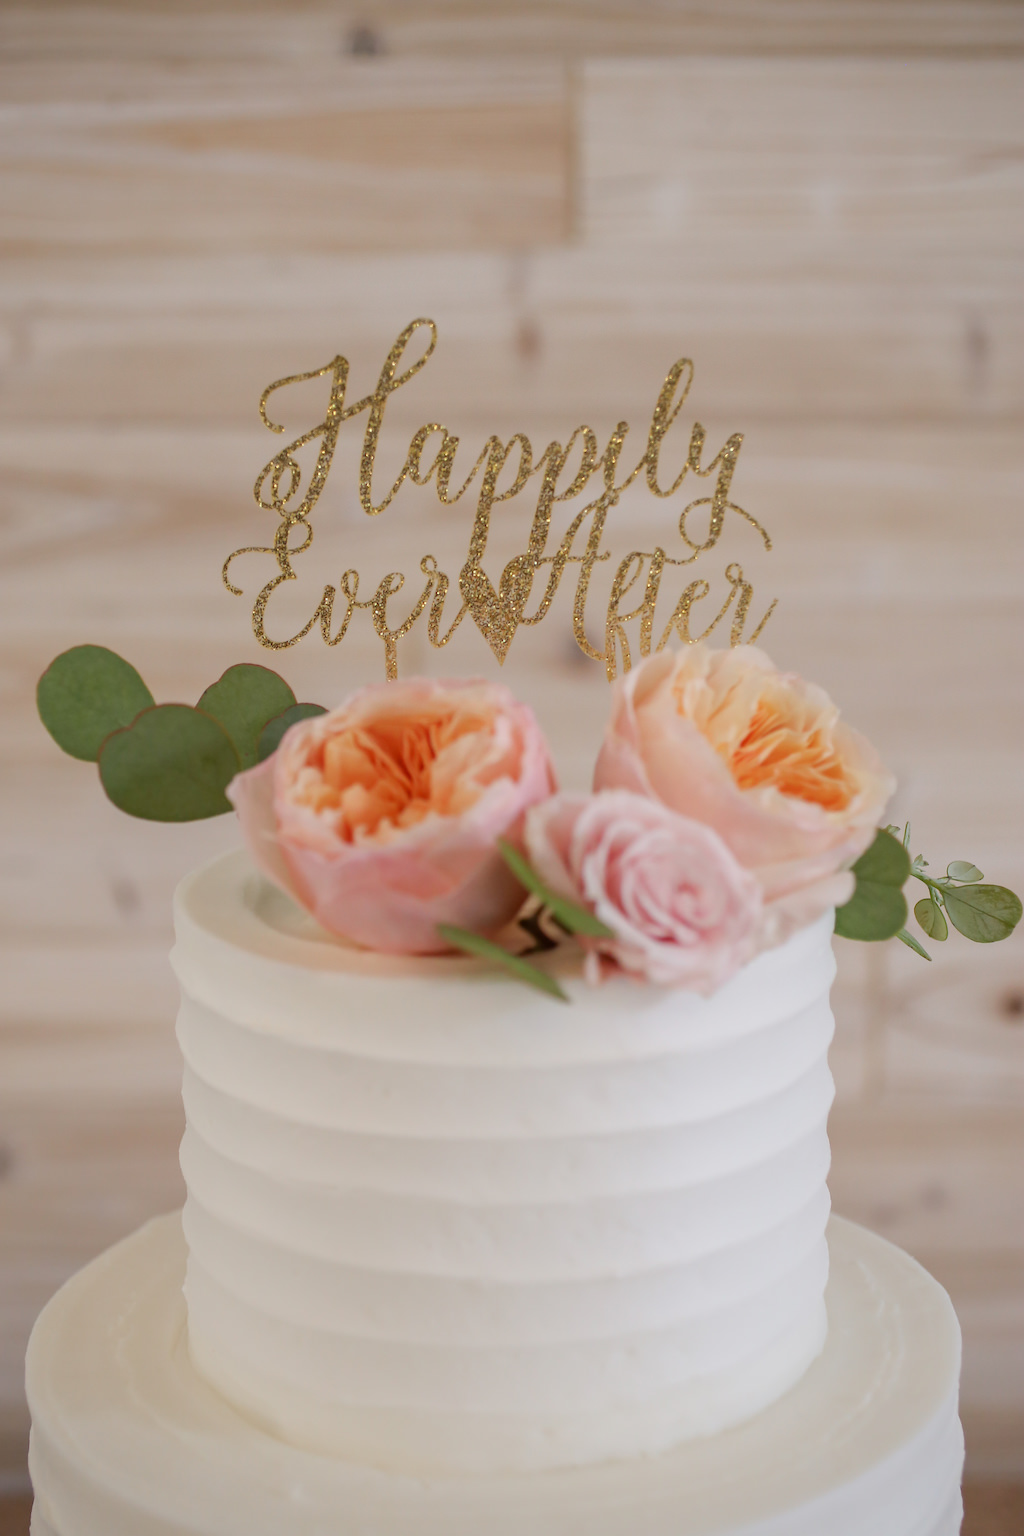 Three Tier White Ruffle Wedding Cake with Real Blush Pink Roses and Greenery and Custom Gold Laser Cut Cake Topper | Tampa Bay Wedding Photographer Lifelong Photography Studios